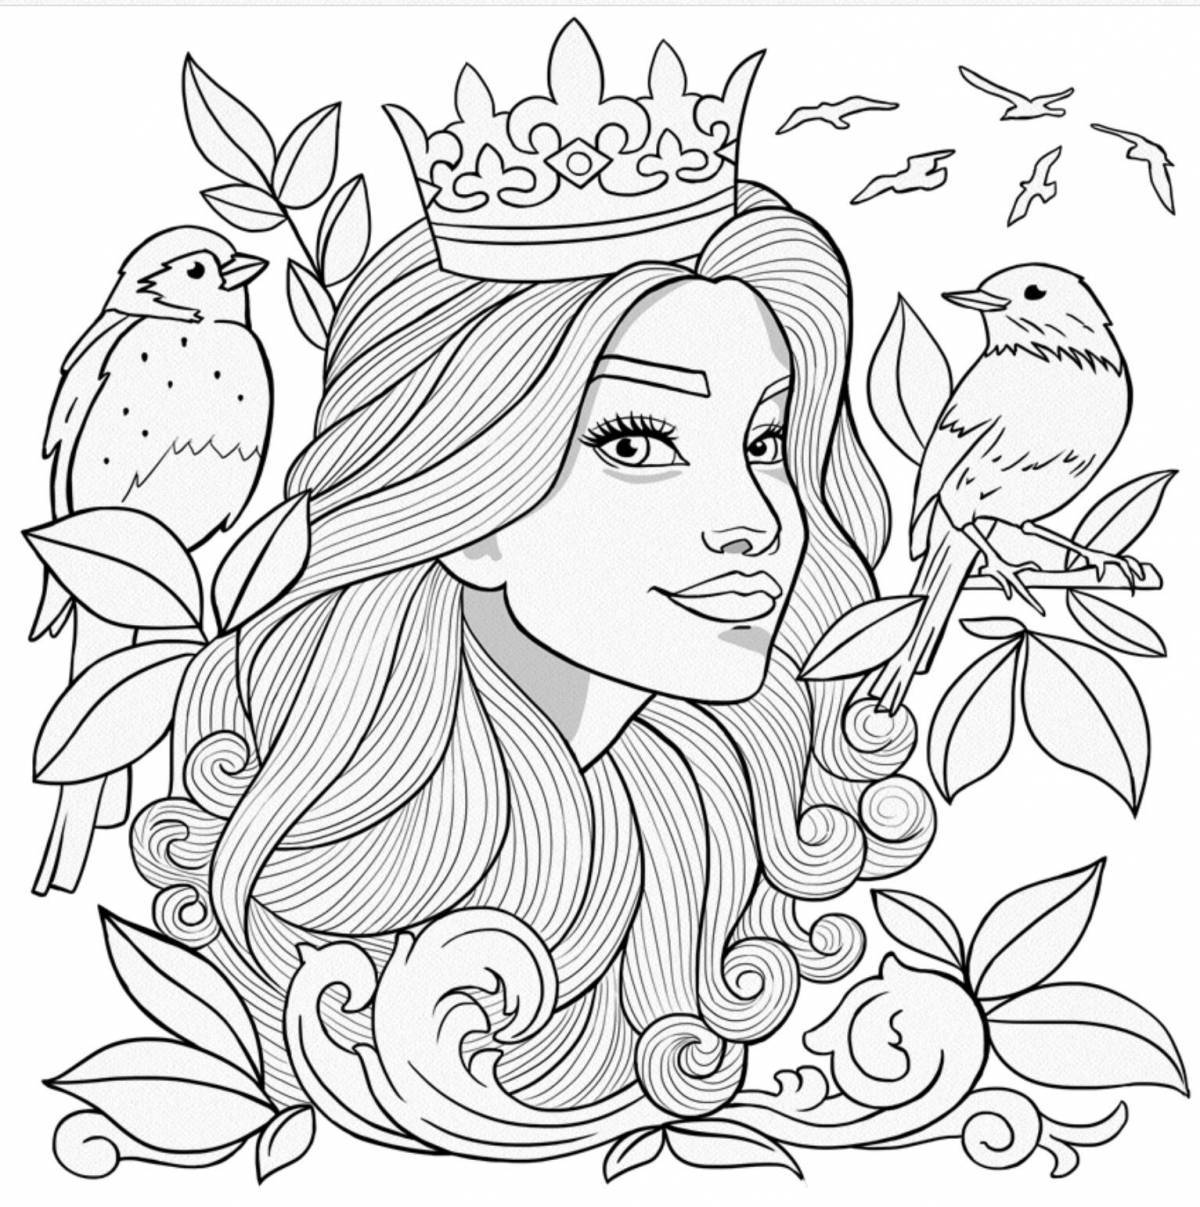 Great 18 year old coloring book for girls